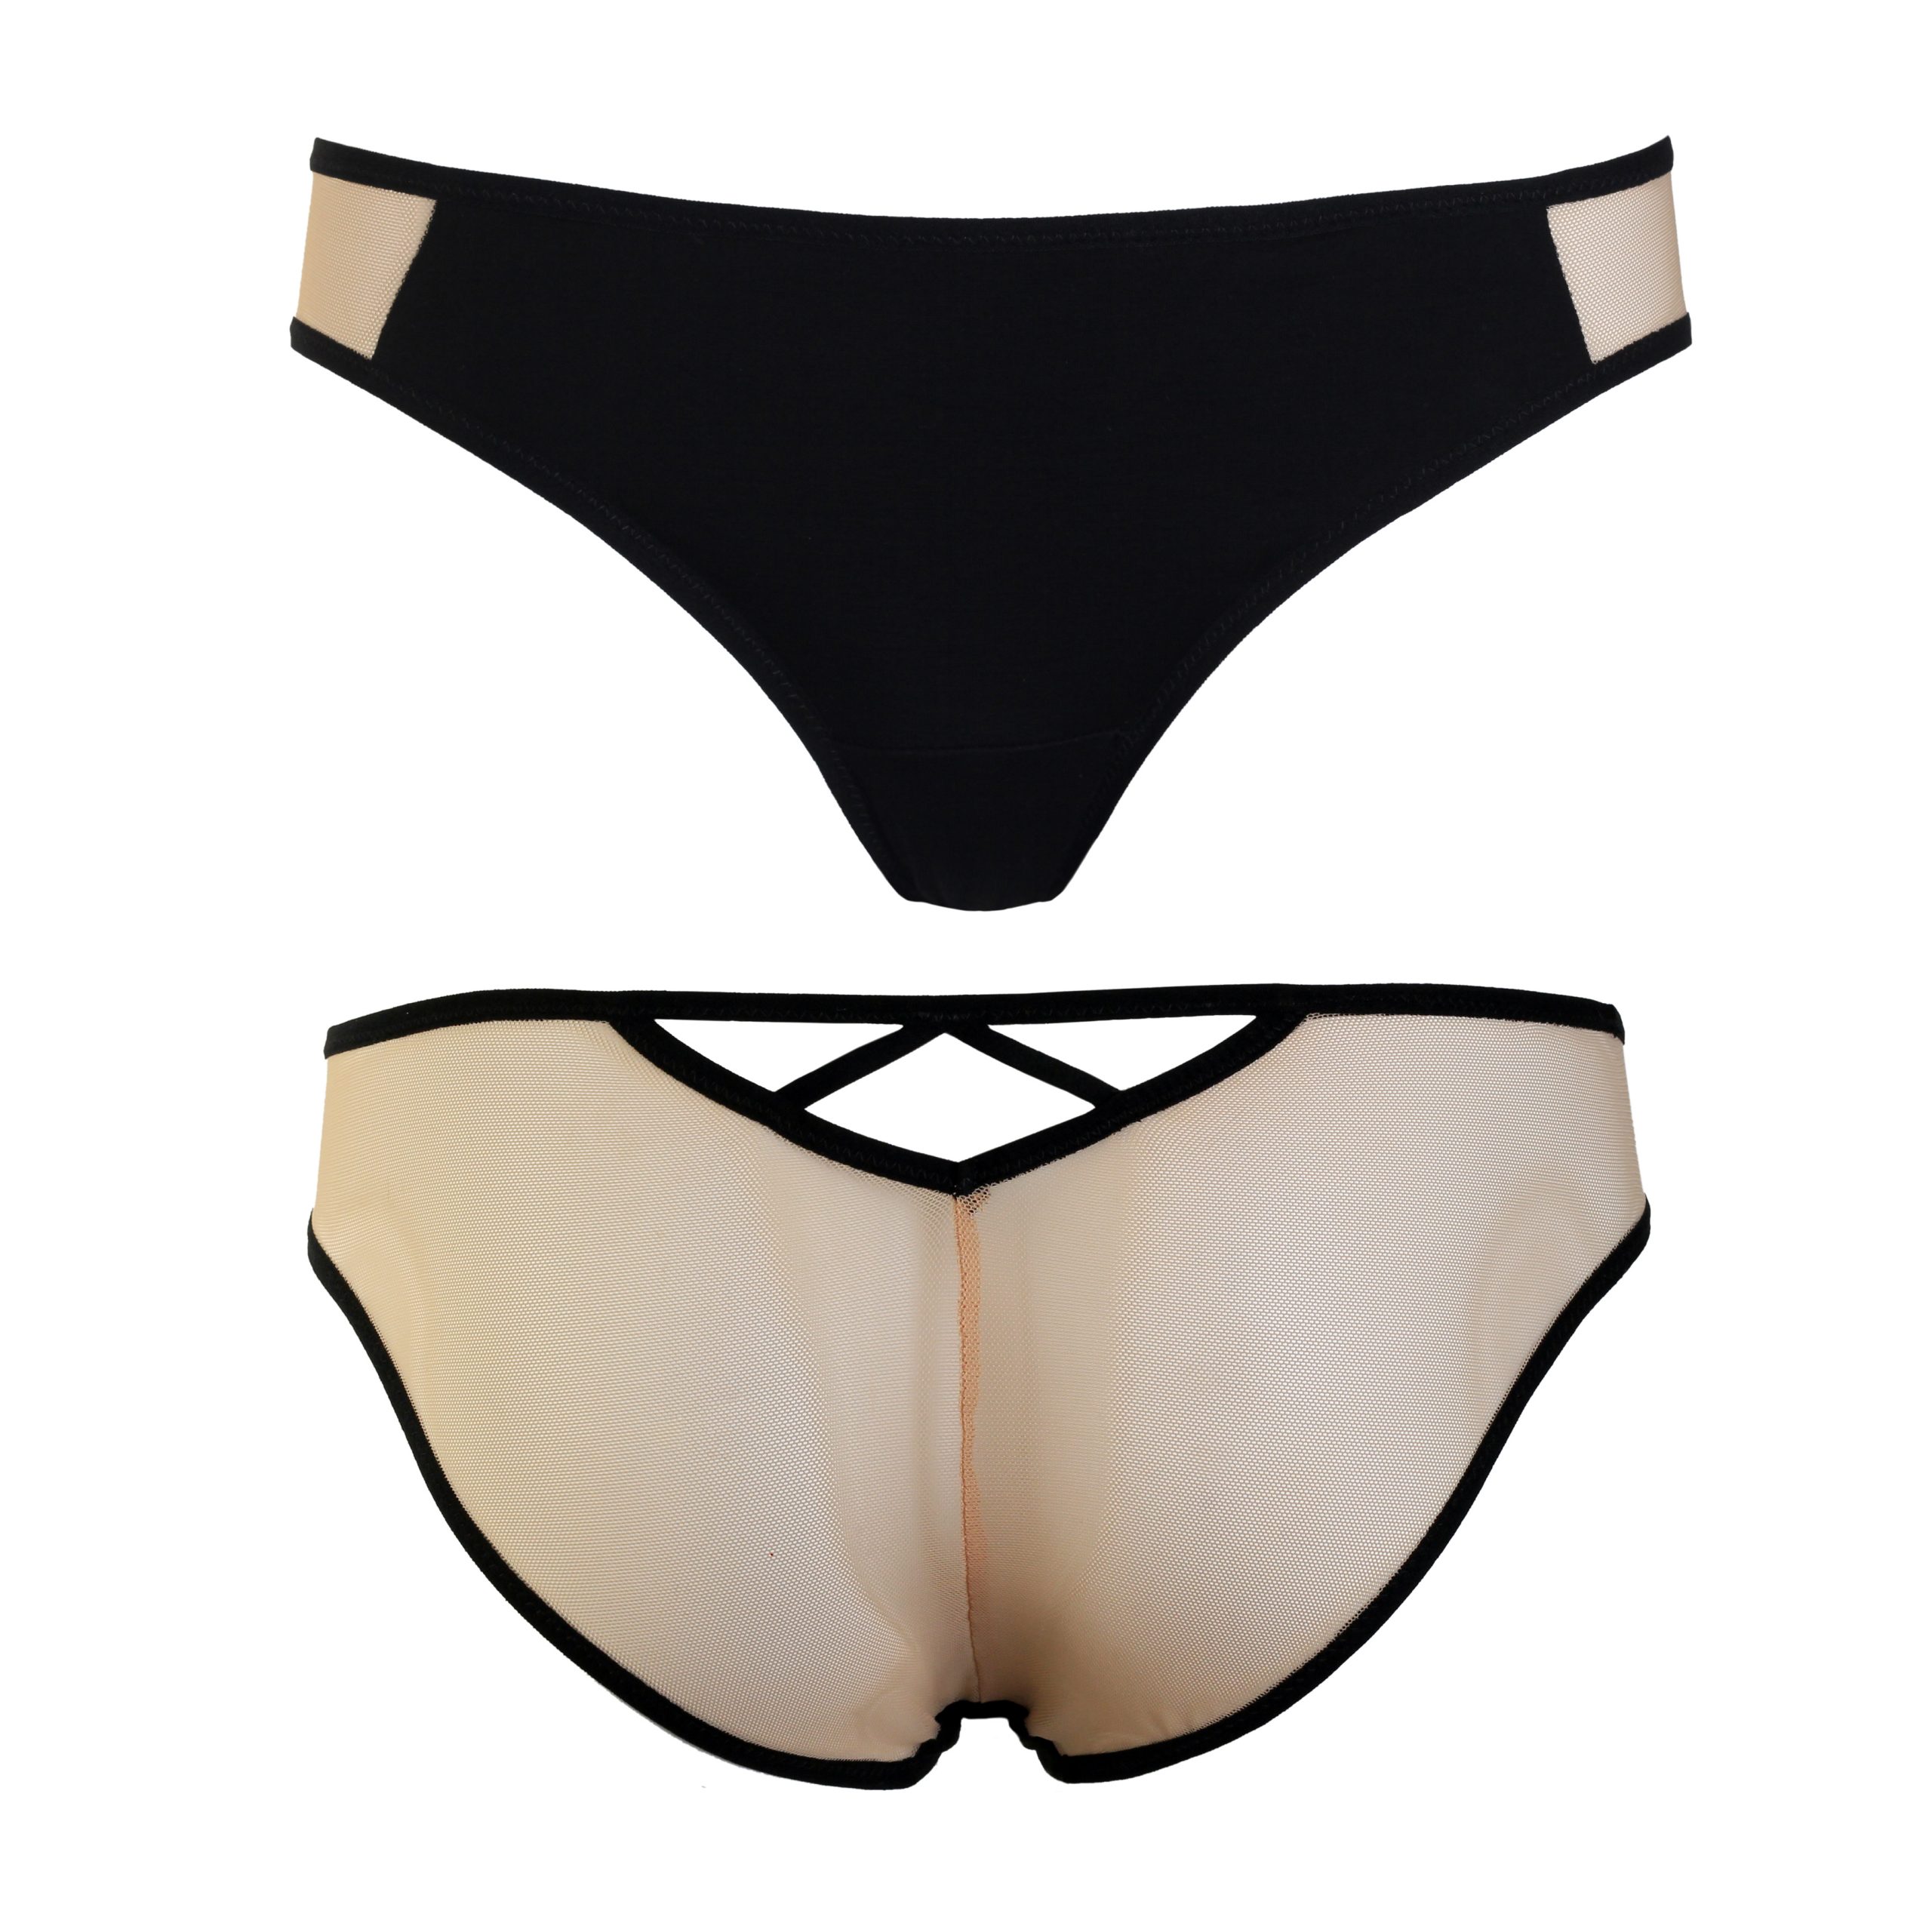 Black Jersey Panties with Sheer Nude Mesh Back by Flash